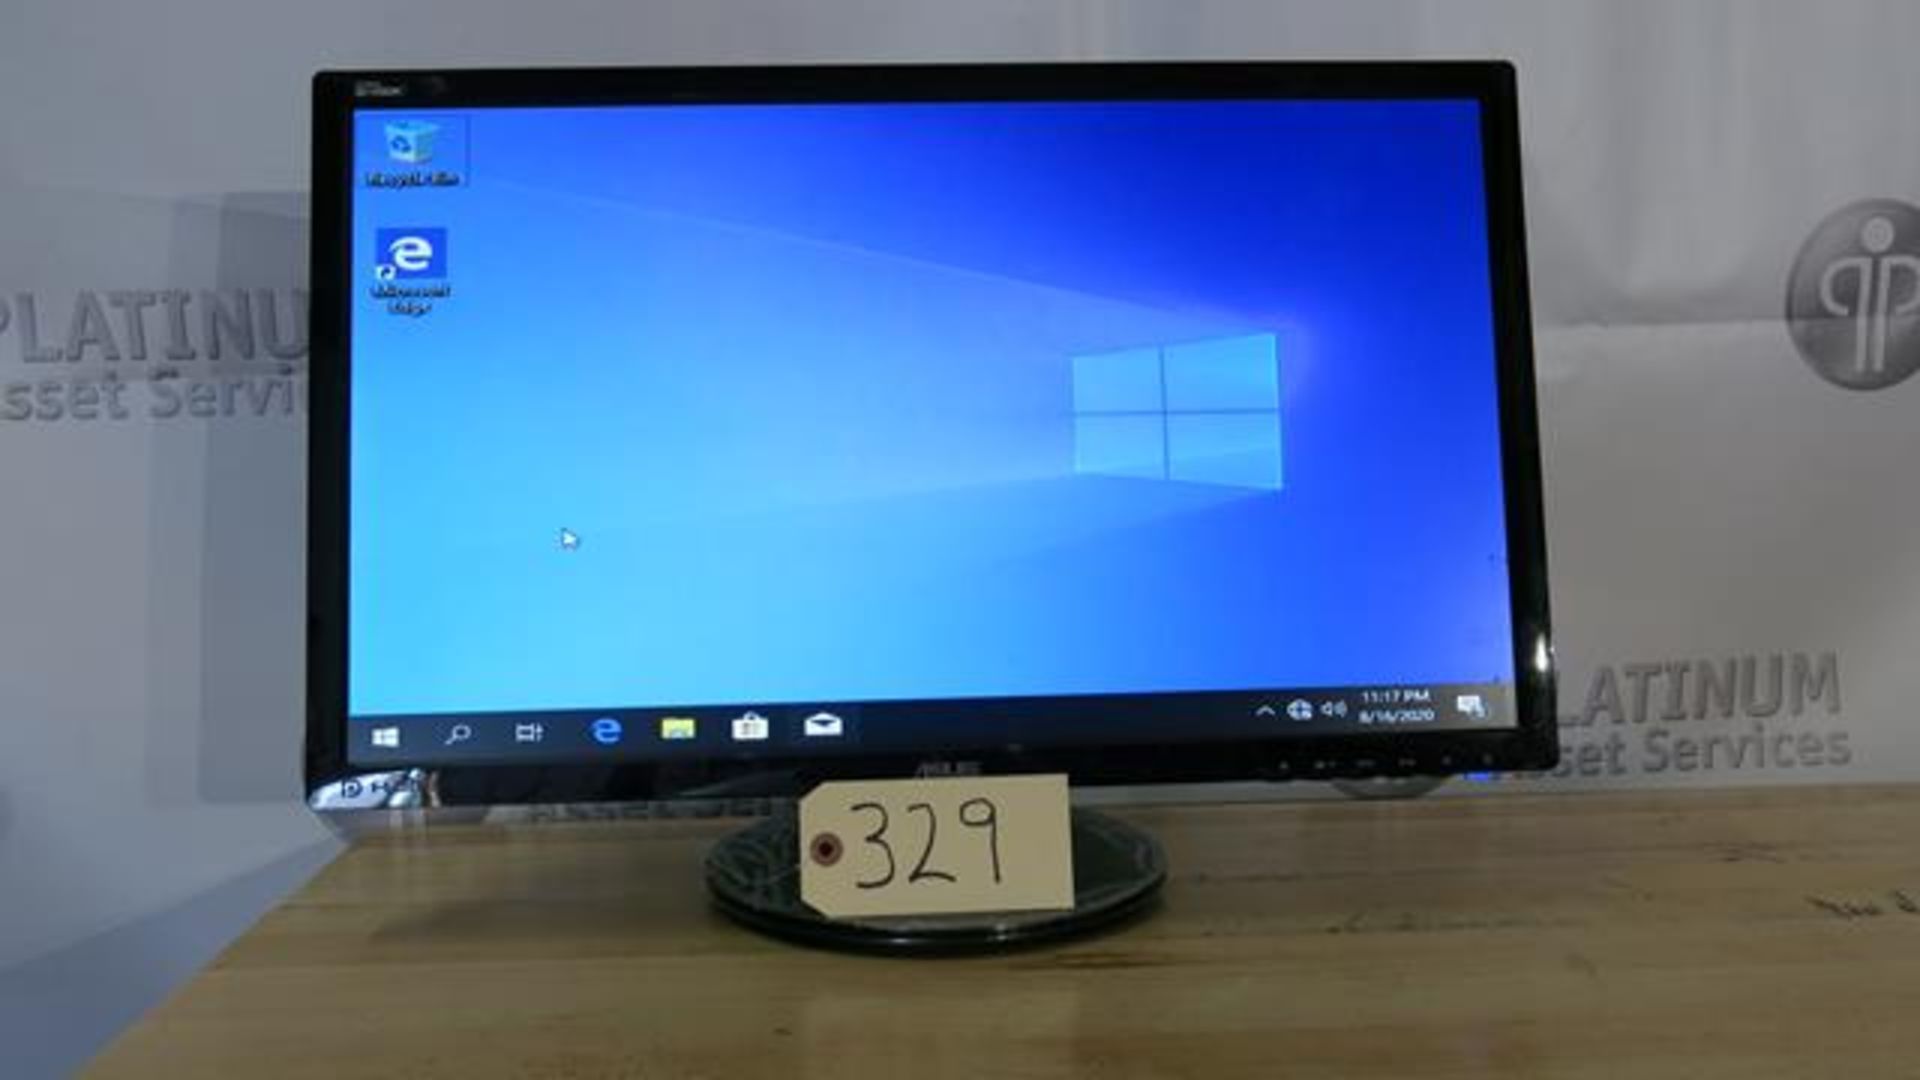 ASUS, VG248QE, 24", 3D CAPABLE, WIDESCREEN COMPUTER MONITOR (TAG#329)